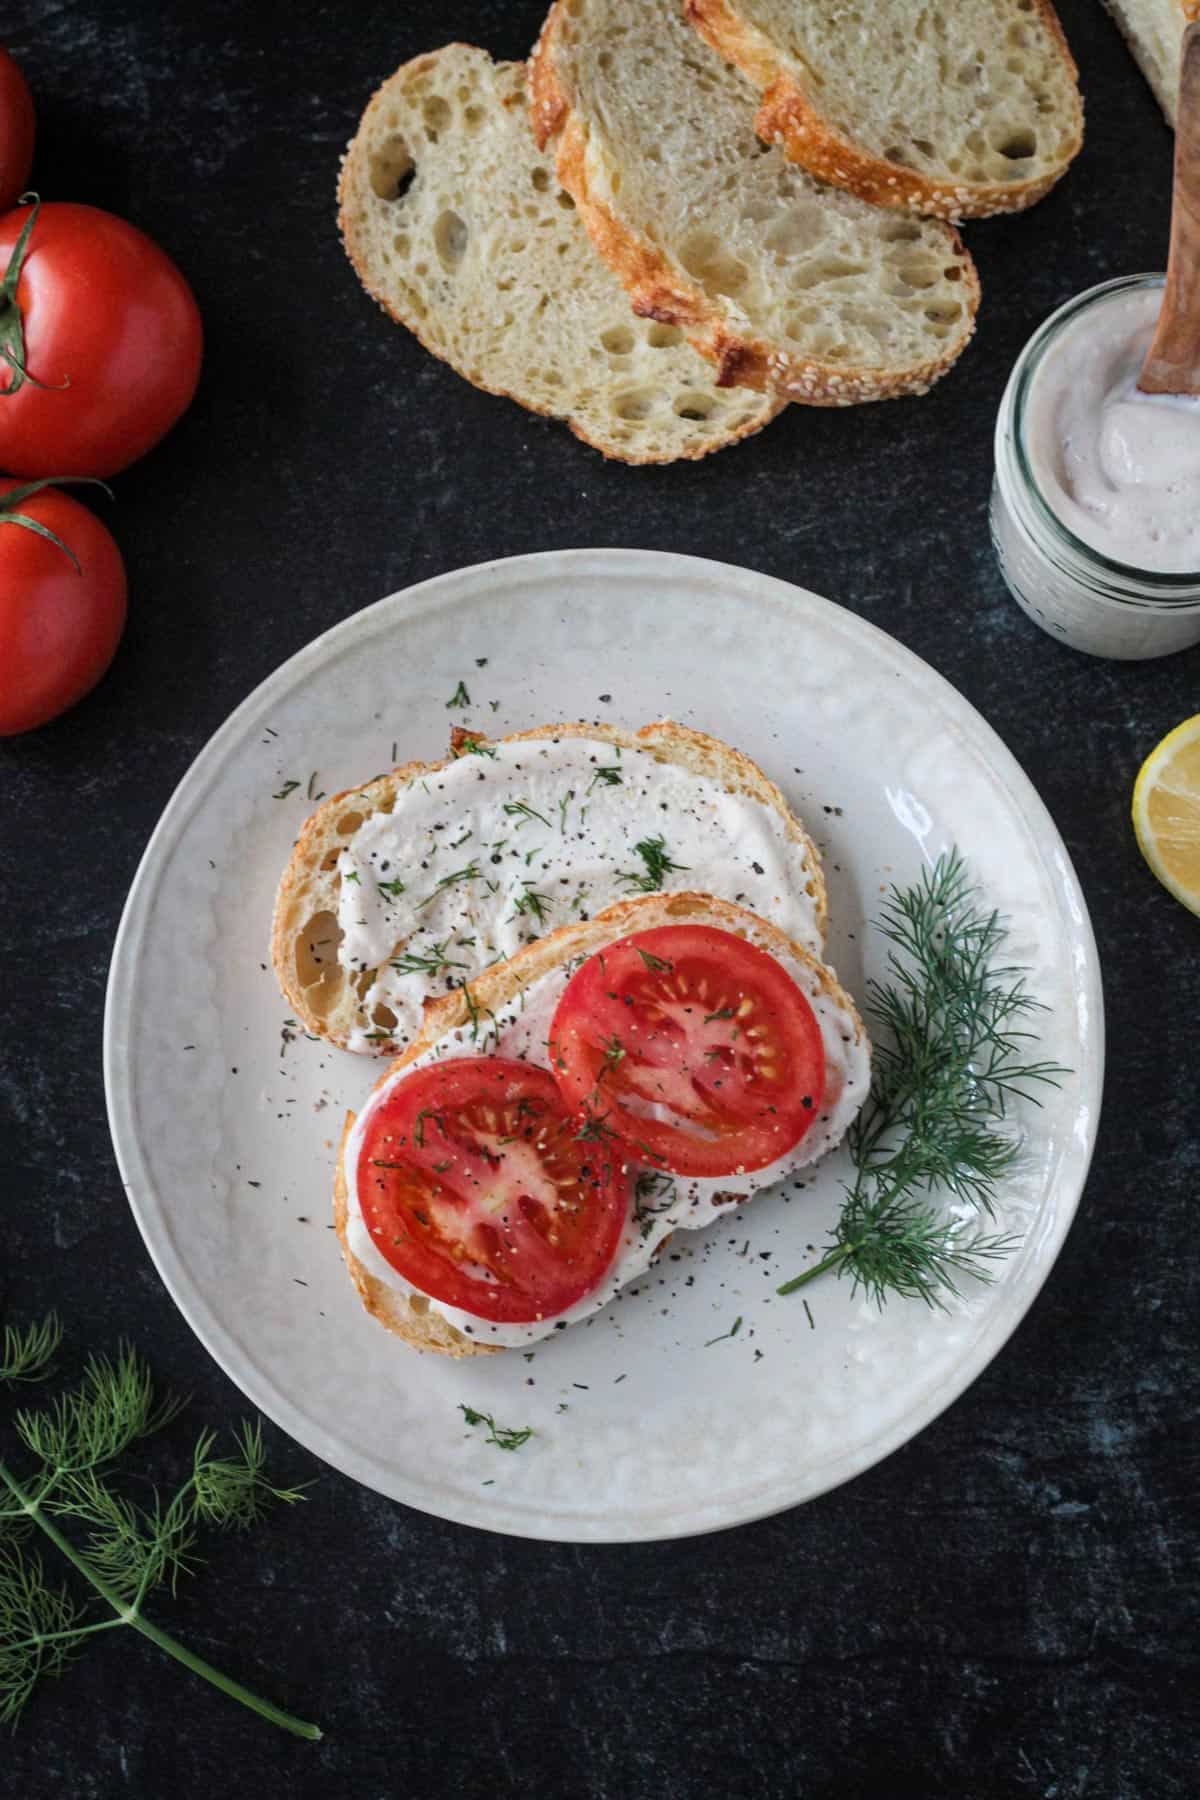 Two pieces of toast topped with vegan mayonnaise spread, tomato slices, and fresh dill.